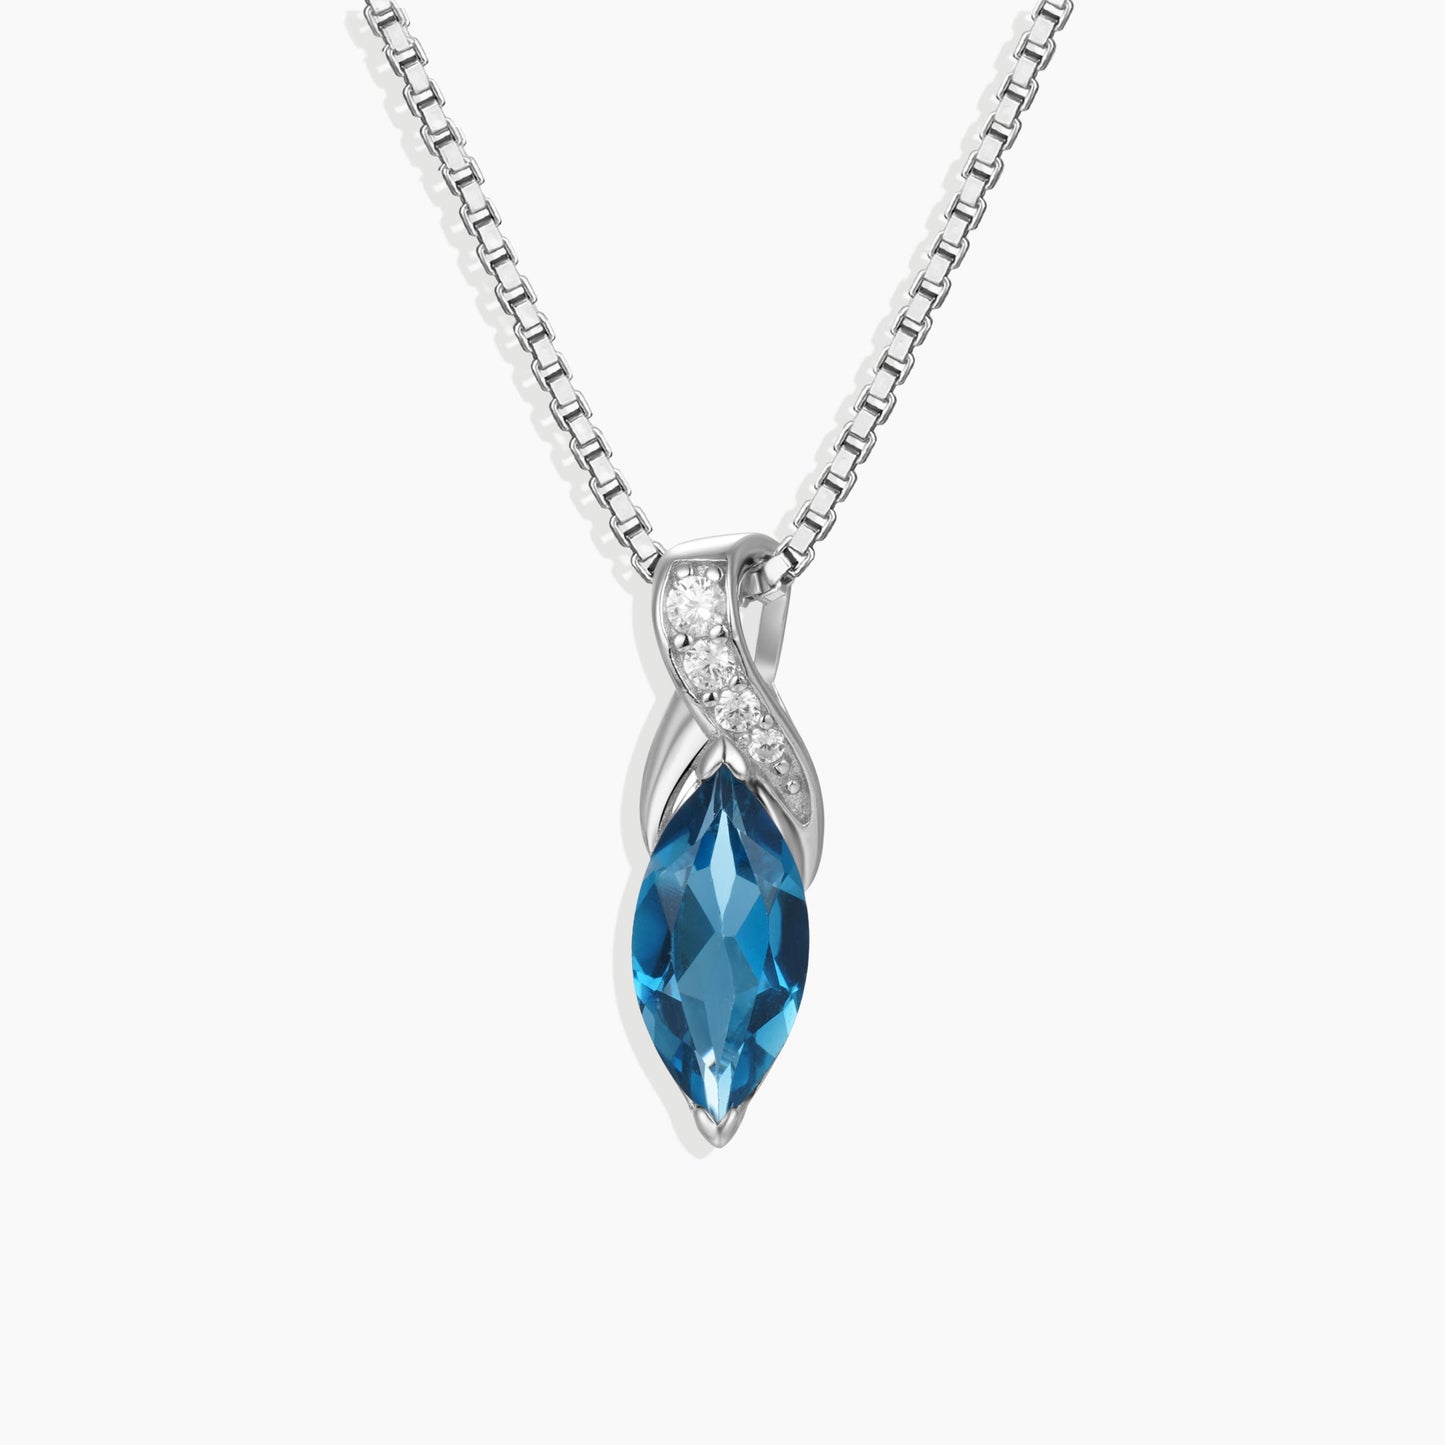 London Blue Topaz Infinity Pendant Necklace in Sterling Silver